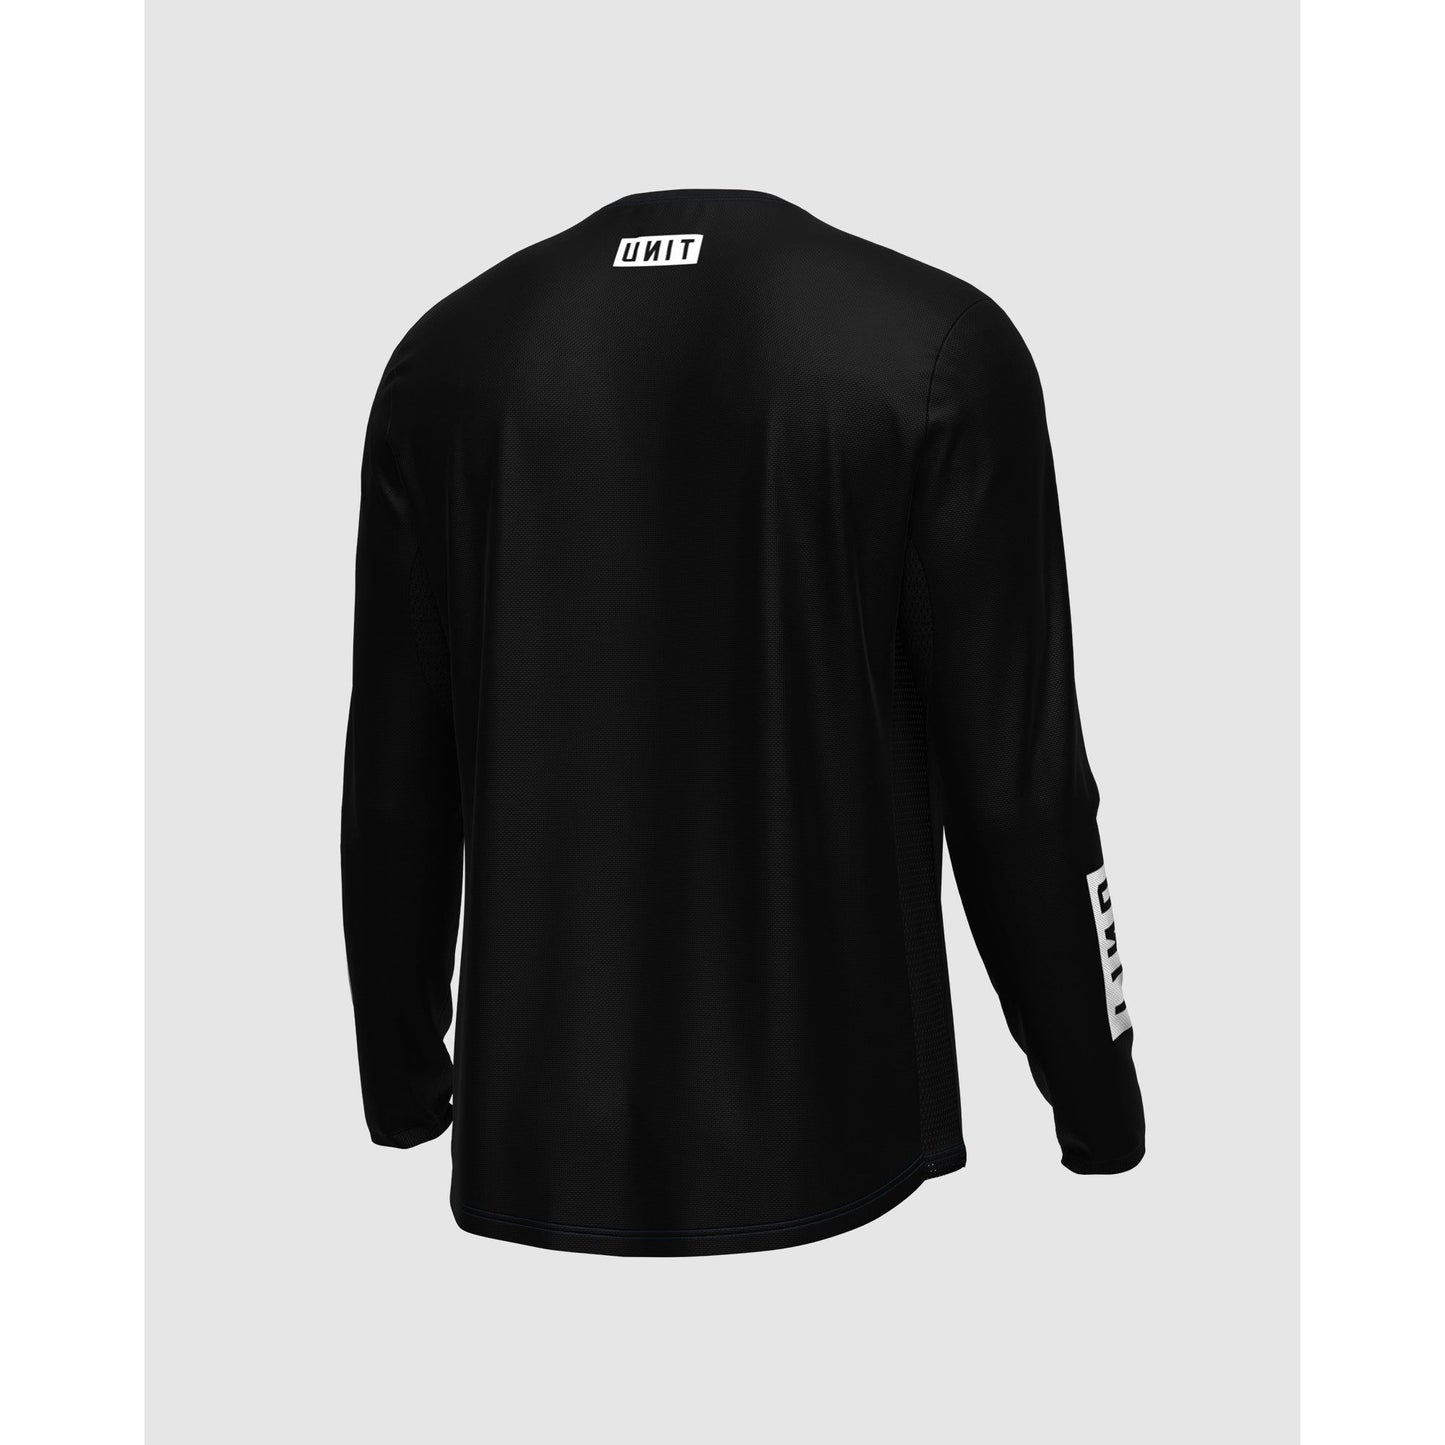 Unit Youth Long Sleeve Jersey - Youth M - Stack - Image 2